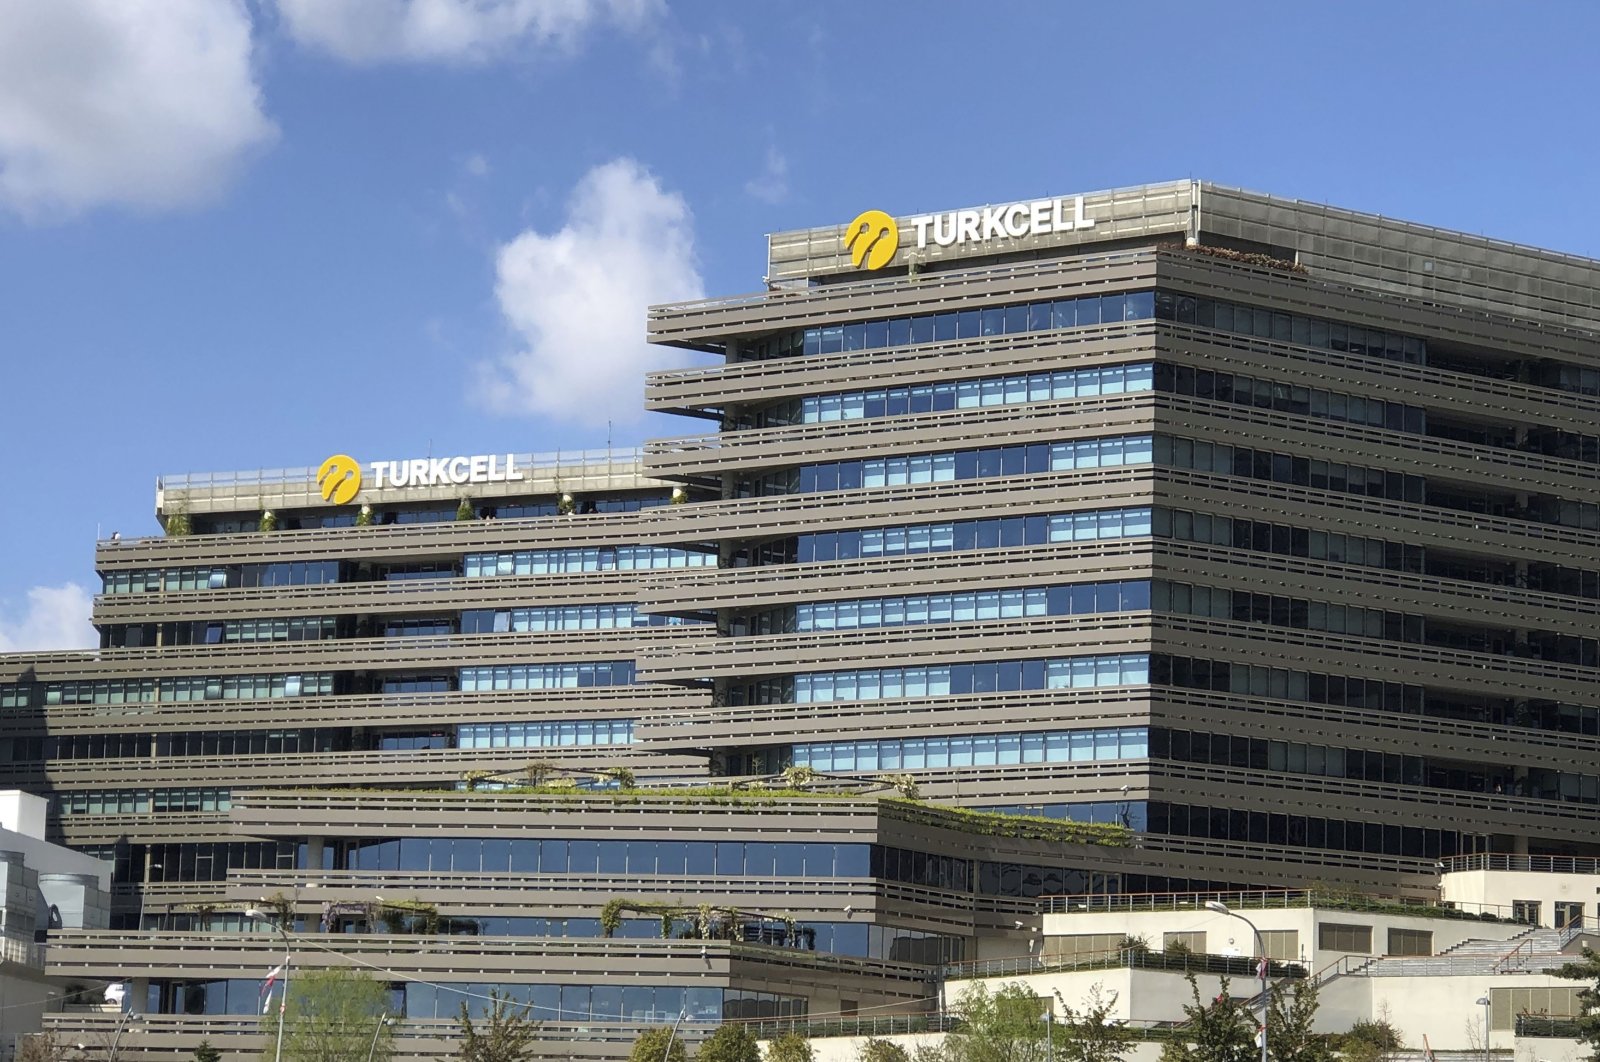 The Turkcell General Management building in the Küçükyalı district of Istanbul, Turkey, Oct. 22, 2020. (Sabah File Photo)